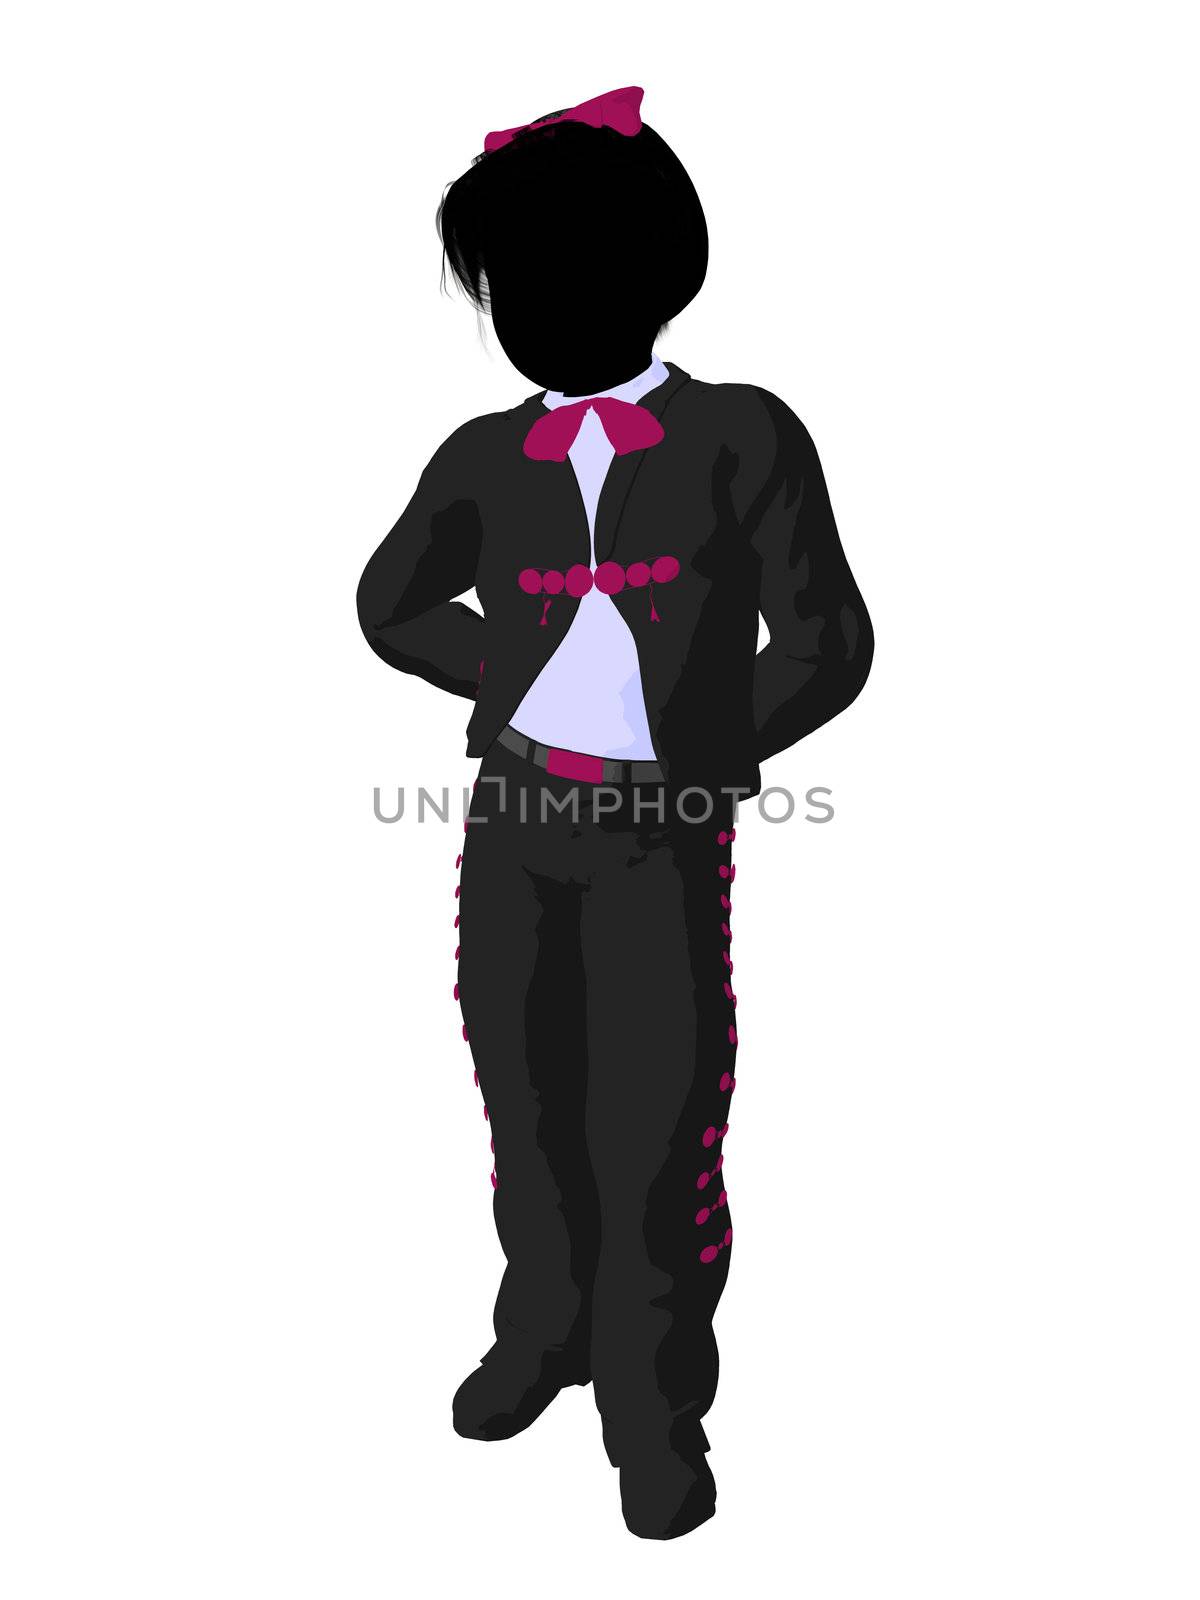 Girl Mariachi Silhouette Illustration by kathygold